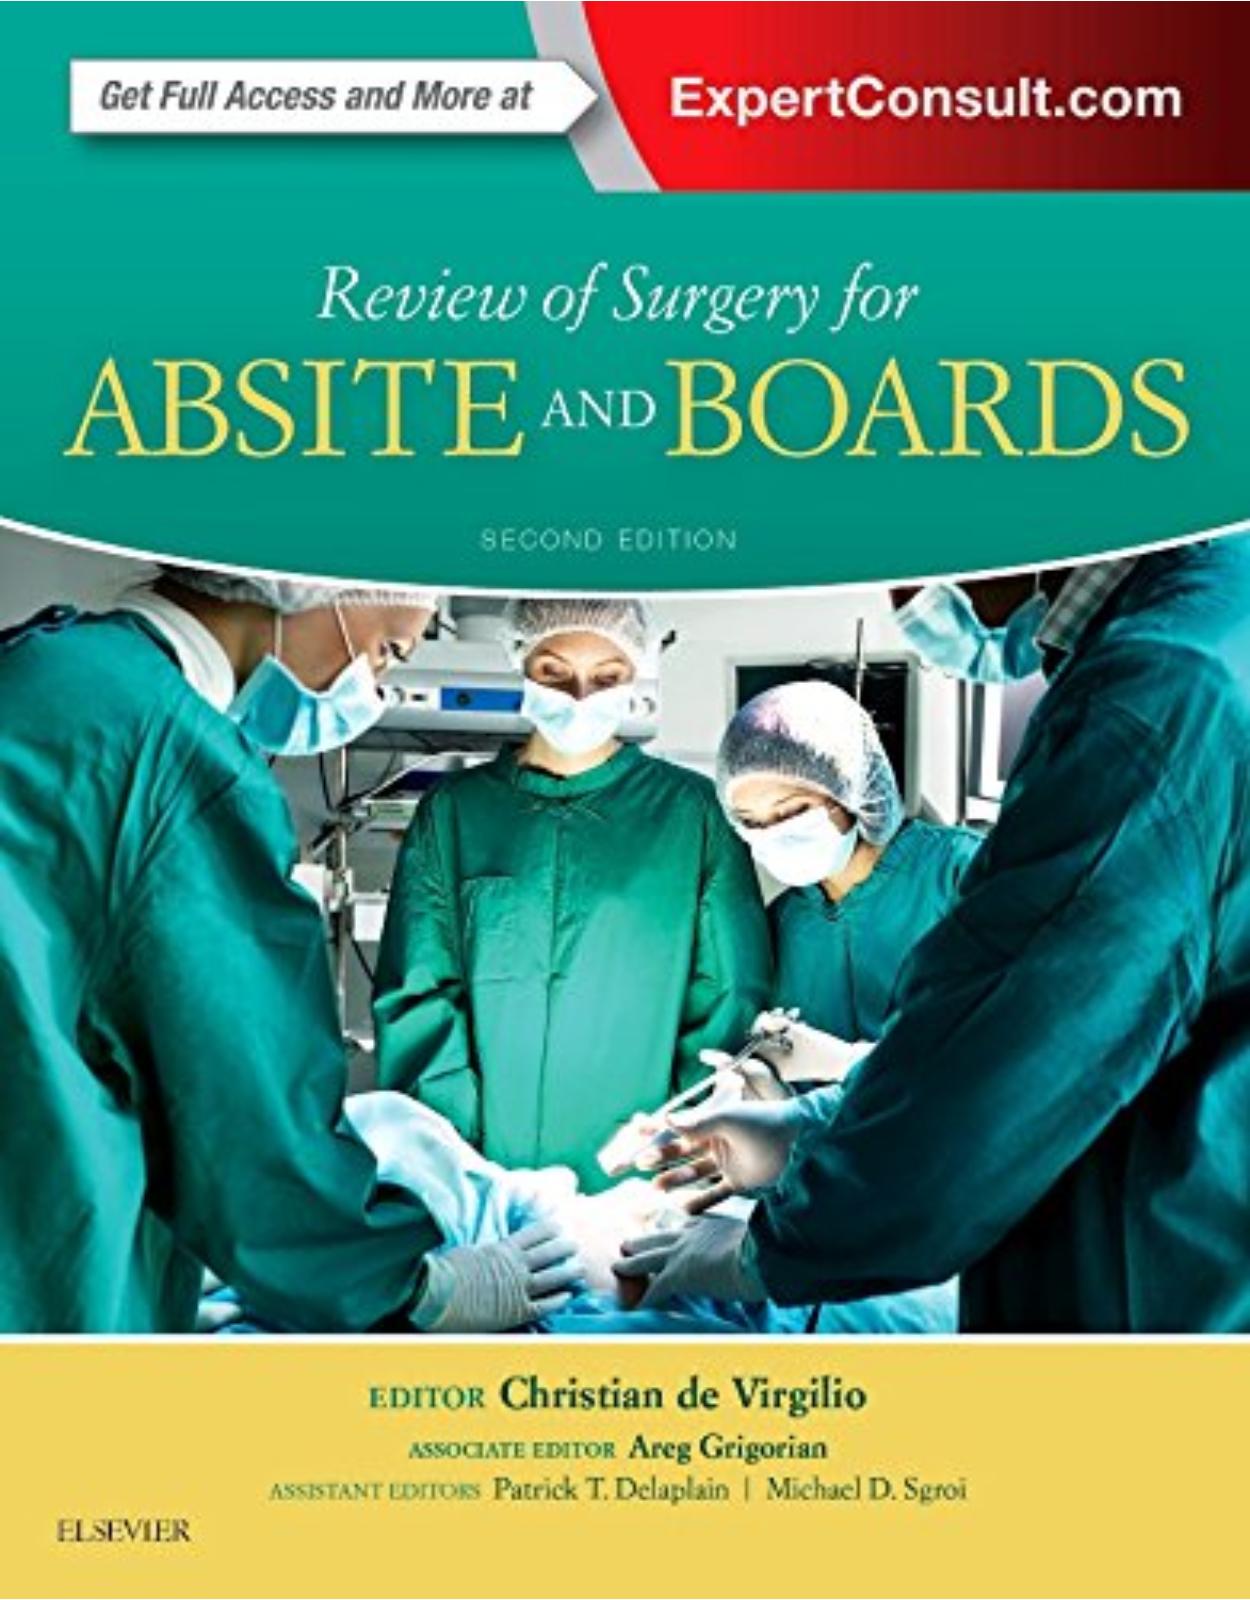 Review of Surgery for ABSITE and Boards, 2e